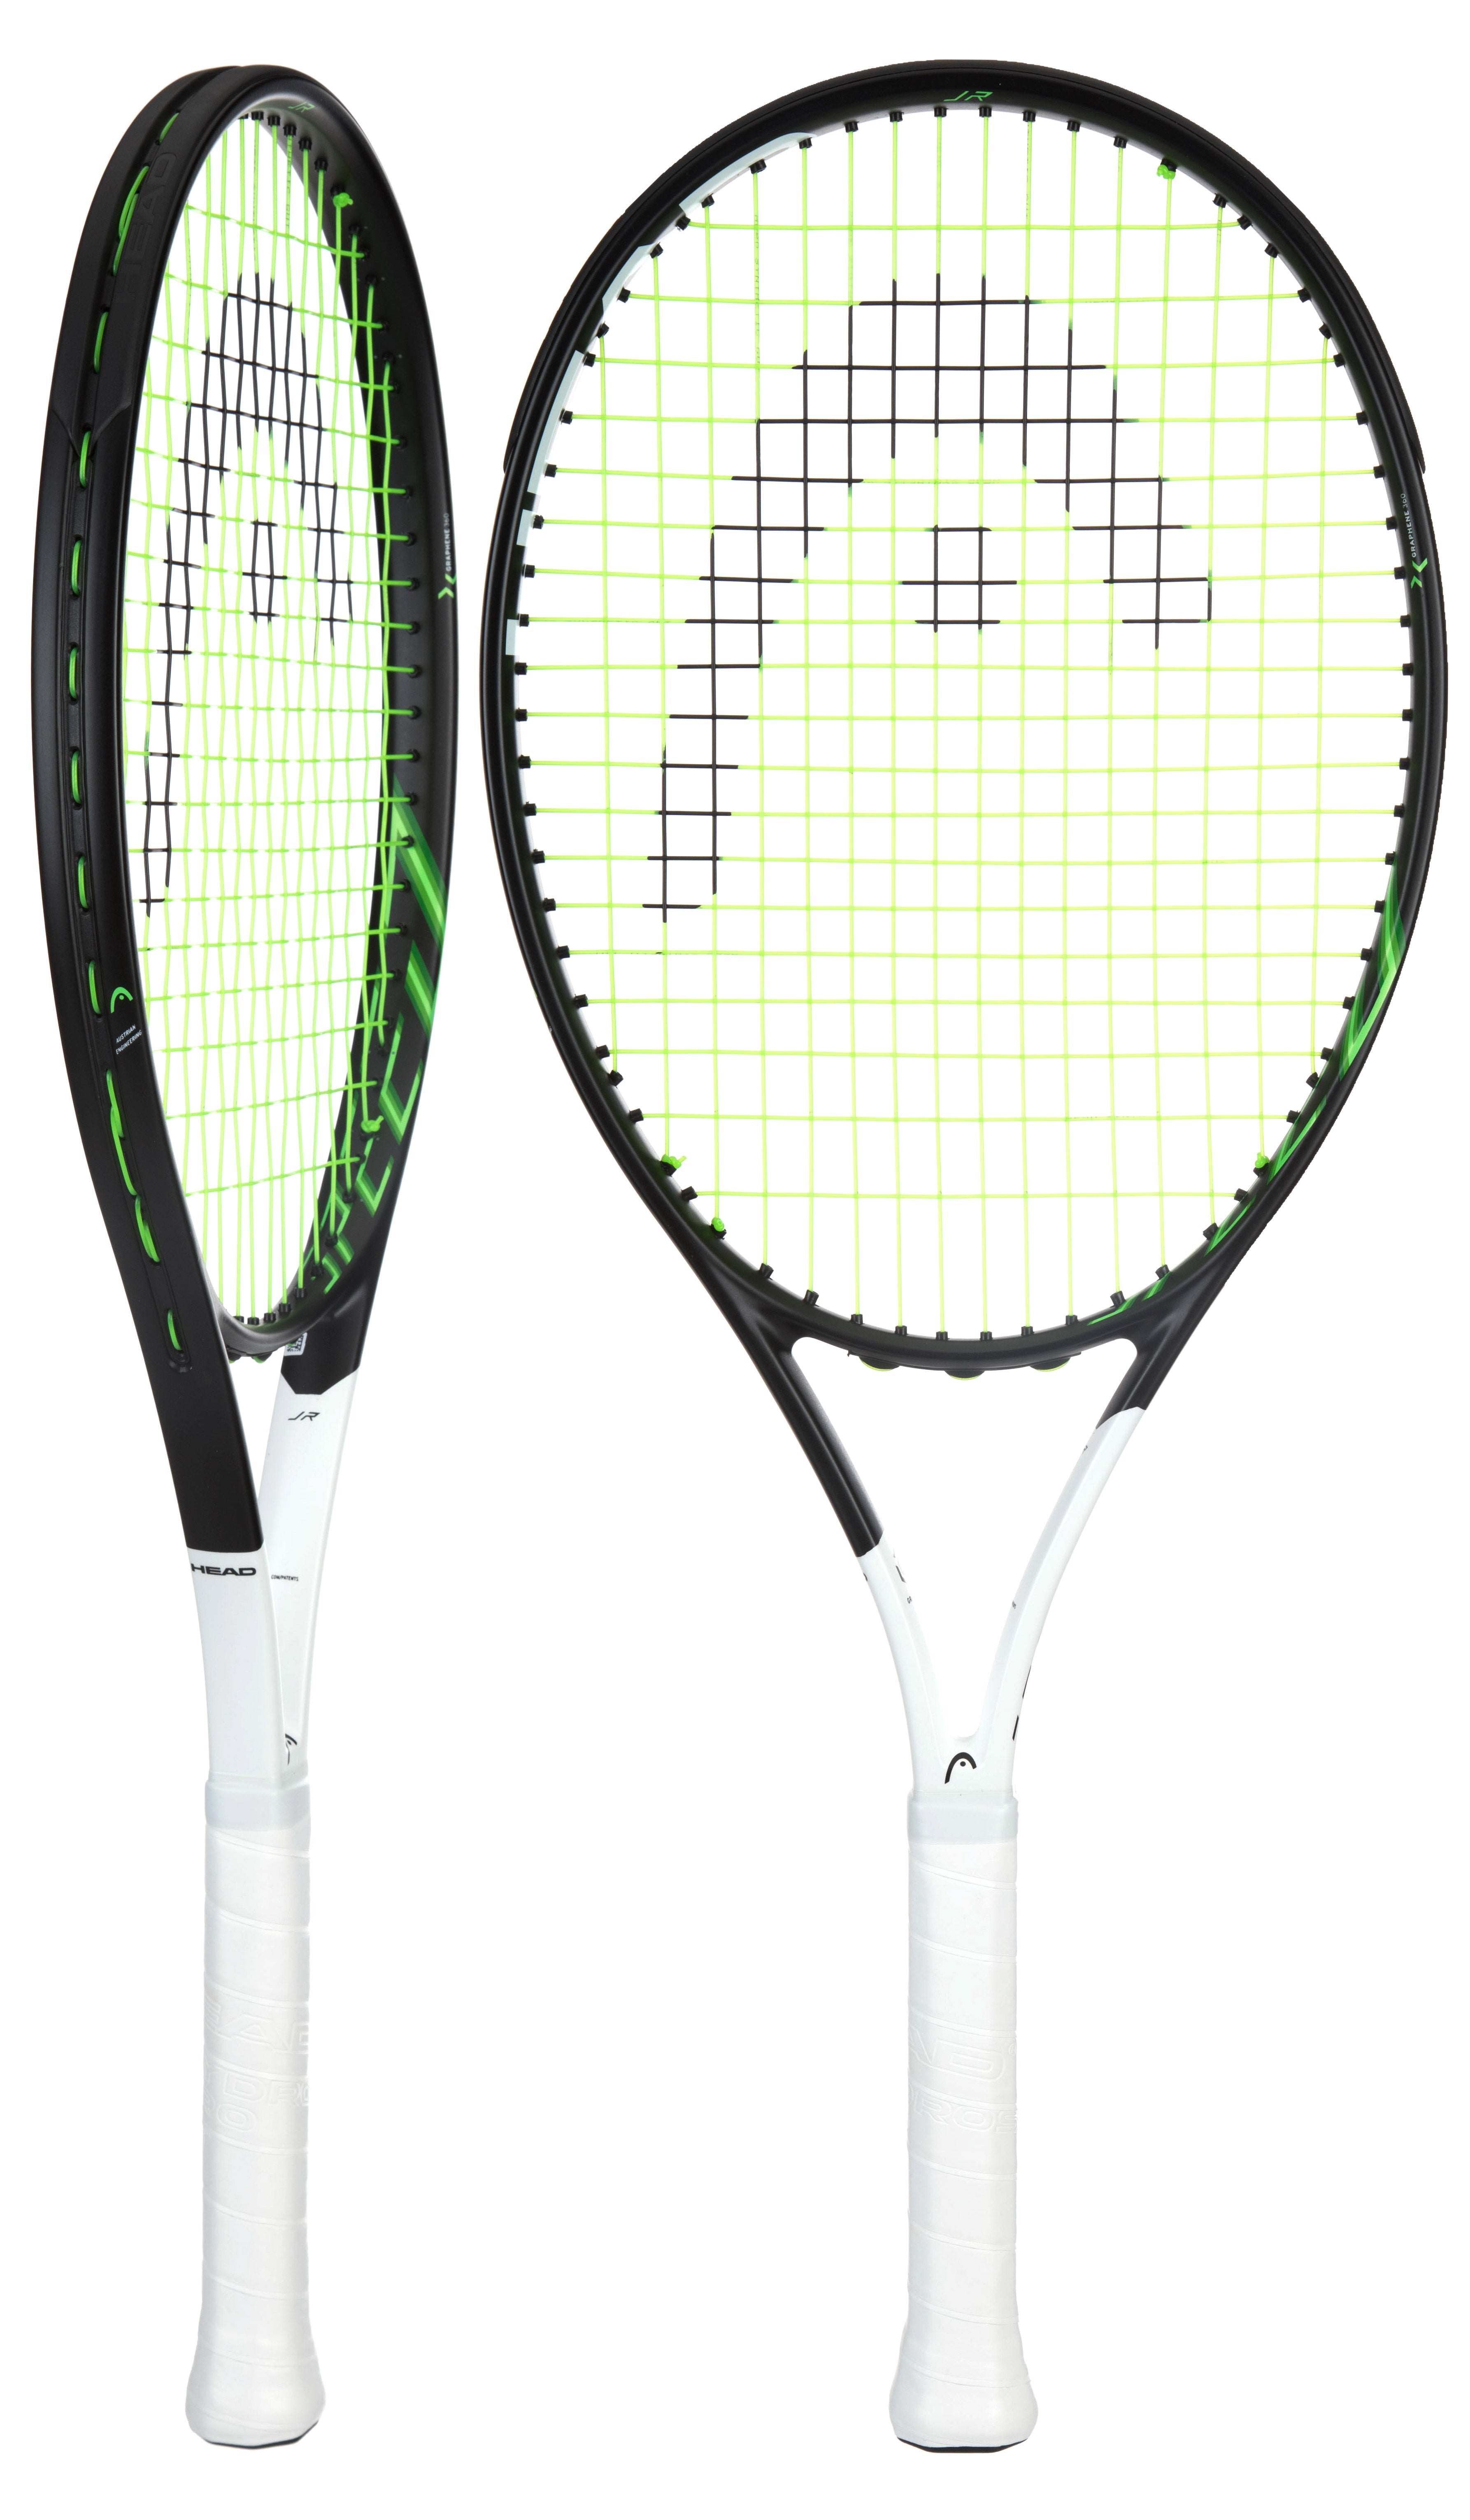 Available in white or grey Head Hawk Tennis String Set 